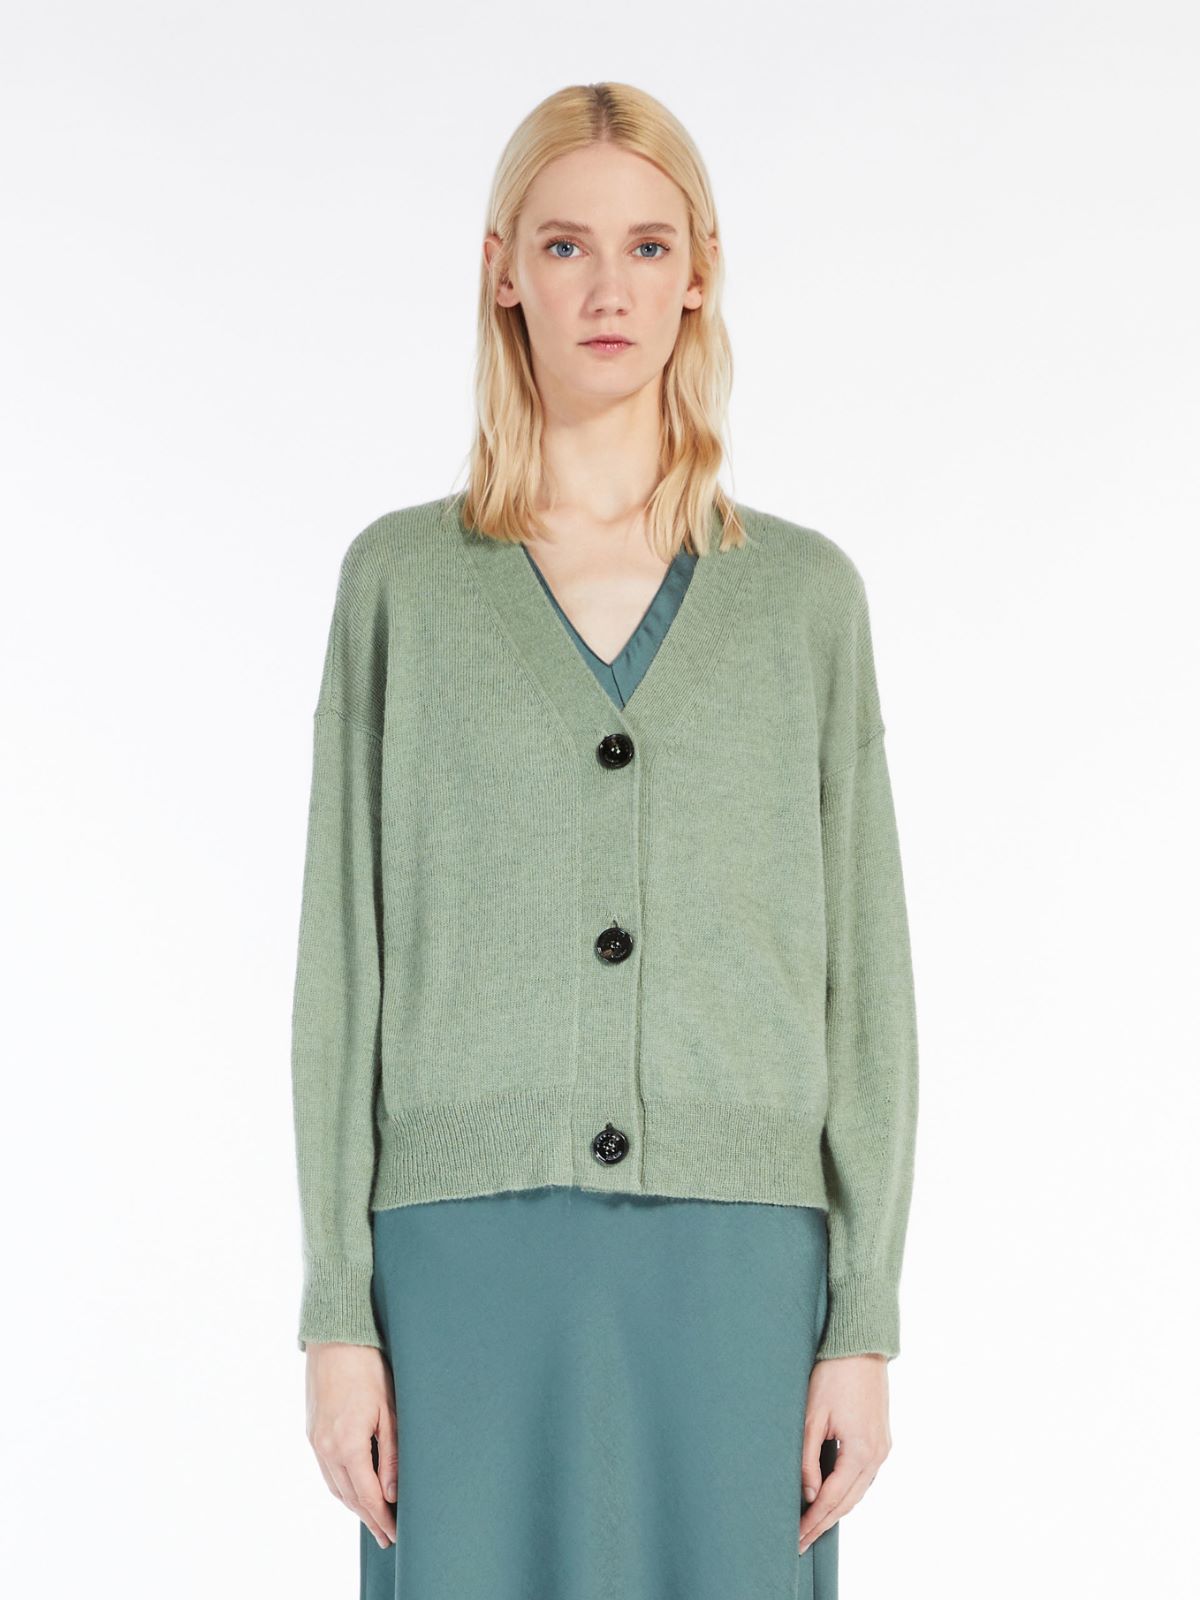 Relaxed-fit cardigan, sage green | Weekend Max Mara